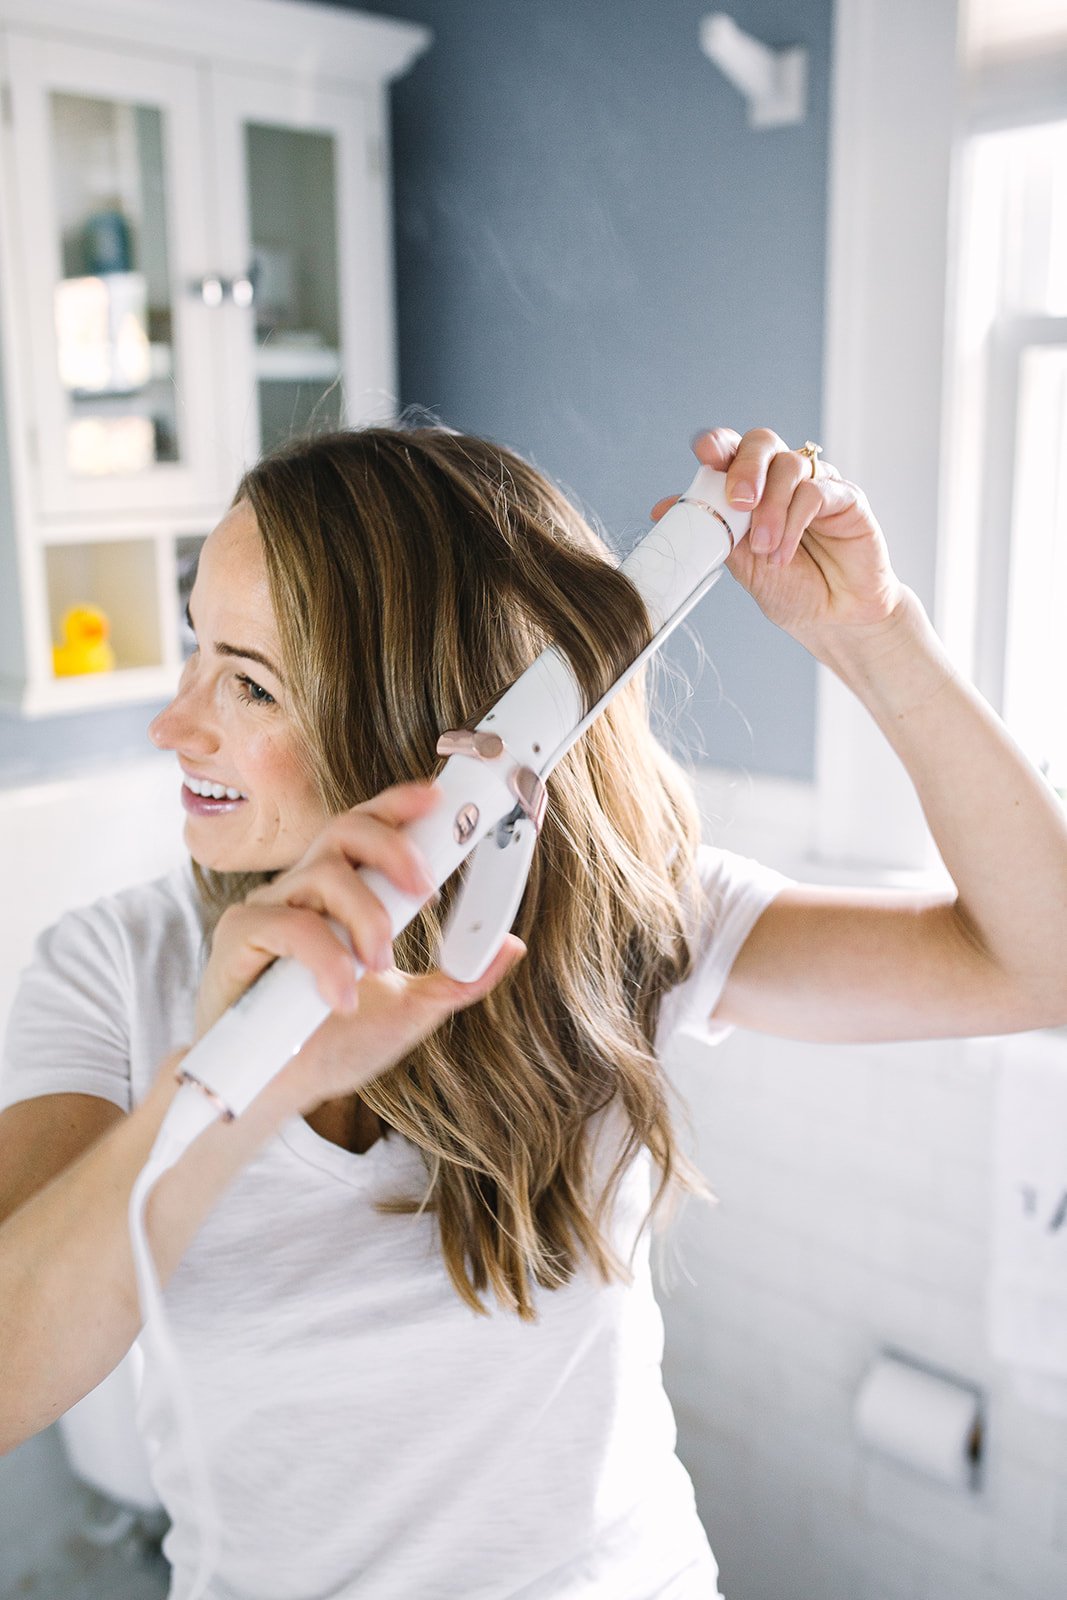 T3 Curling Iron - Gift Guide for Her